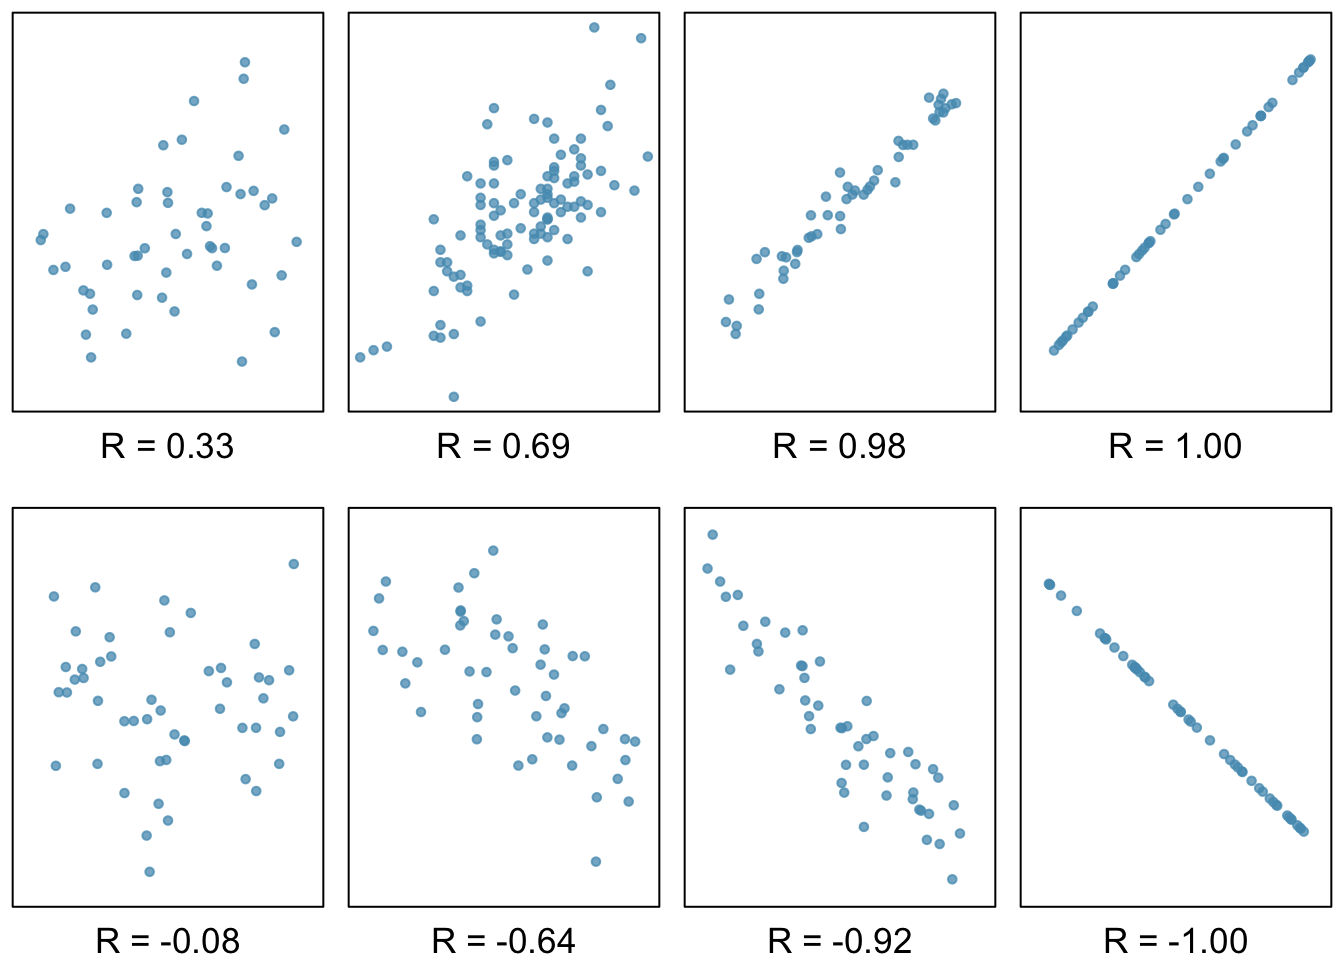 Scatterplots and their correlation coefficients. The first row shows positive associations and the second row shows negative associations. From left to right, strength of the linear association between $x$ and $y$ increases.